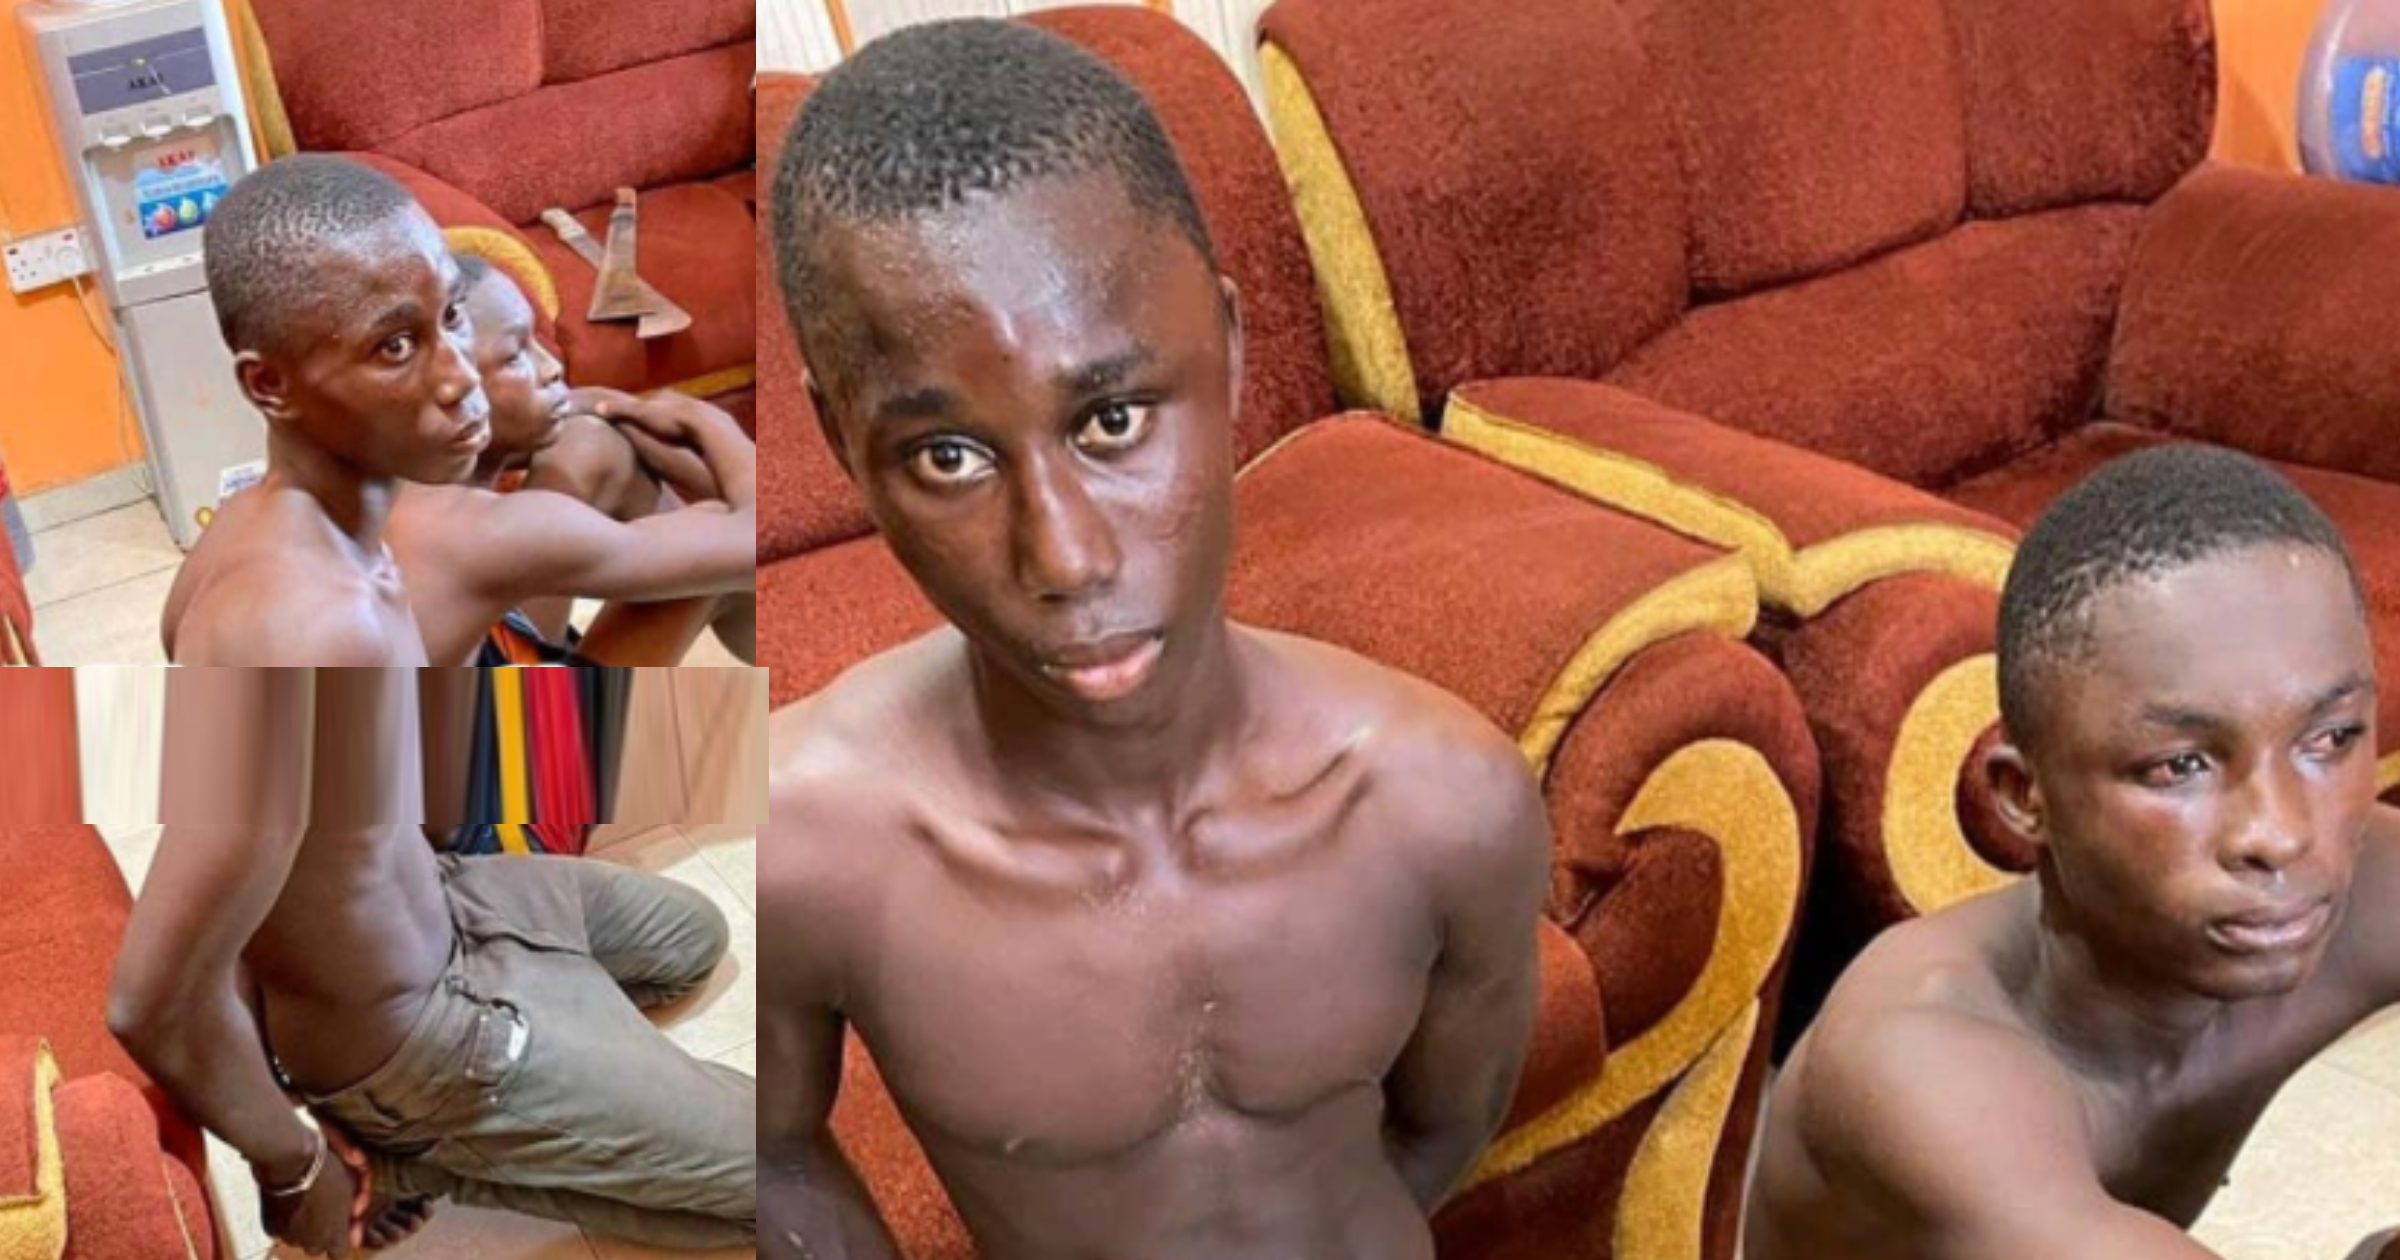 Kasoa: I will take the law into my hands if justice is delayed - Father of 10-year-old boy